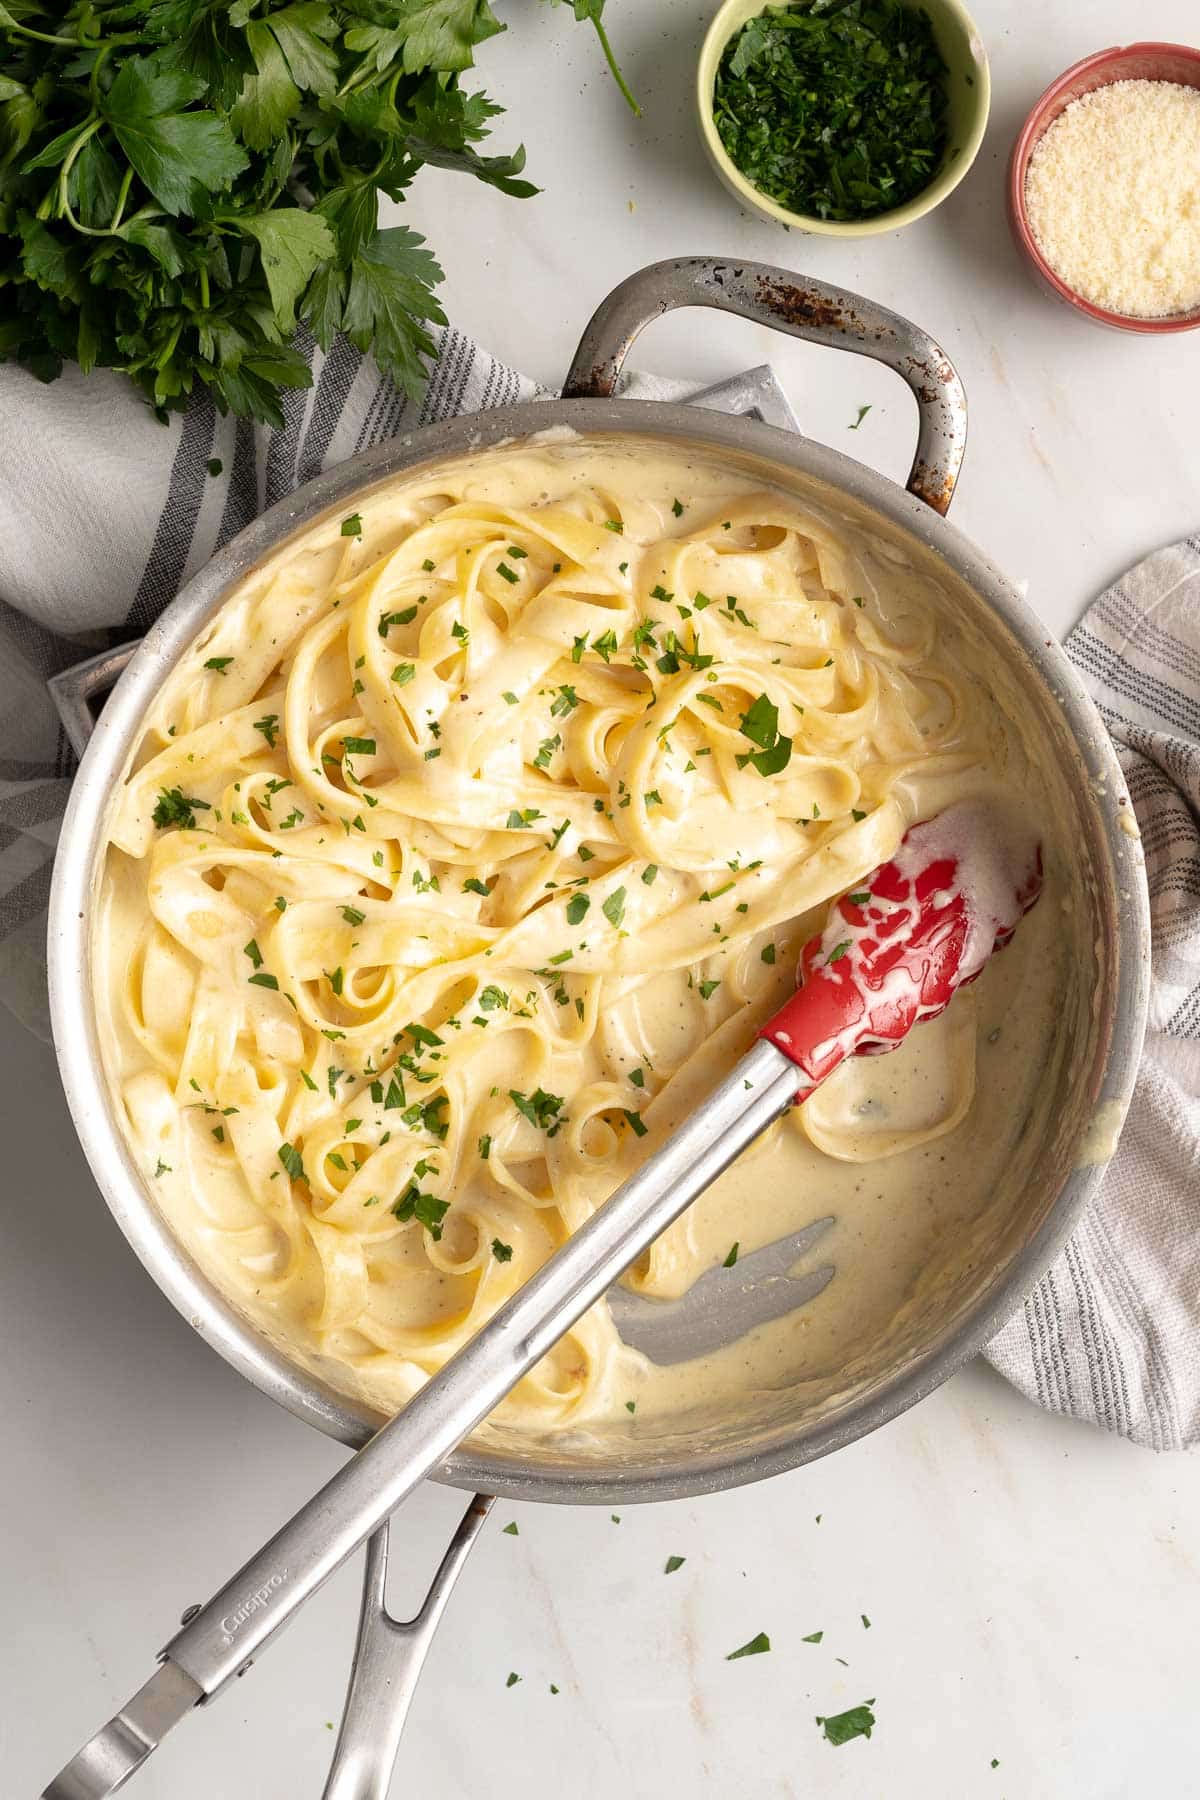 Gluten-free pasta with alfredo sauce in a pot.